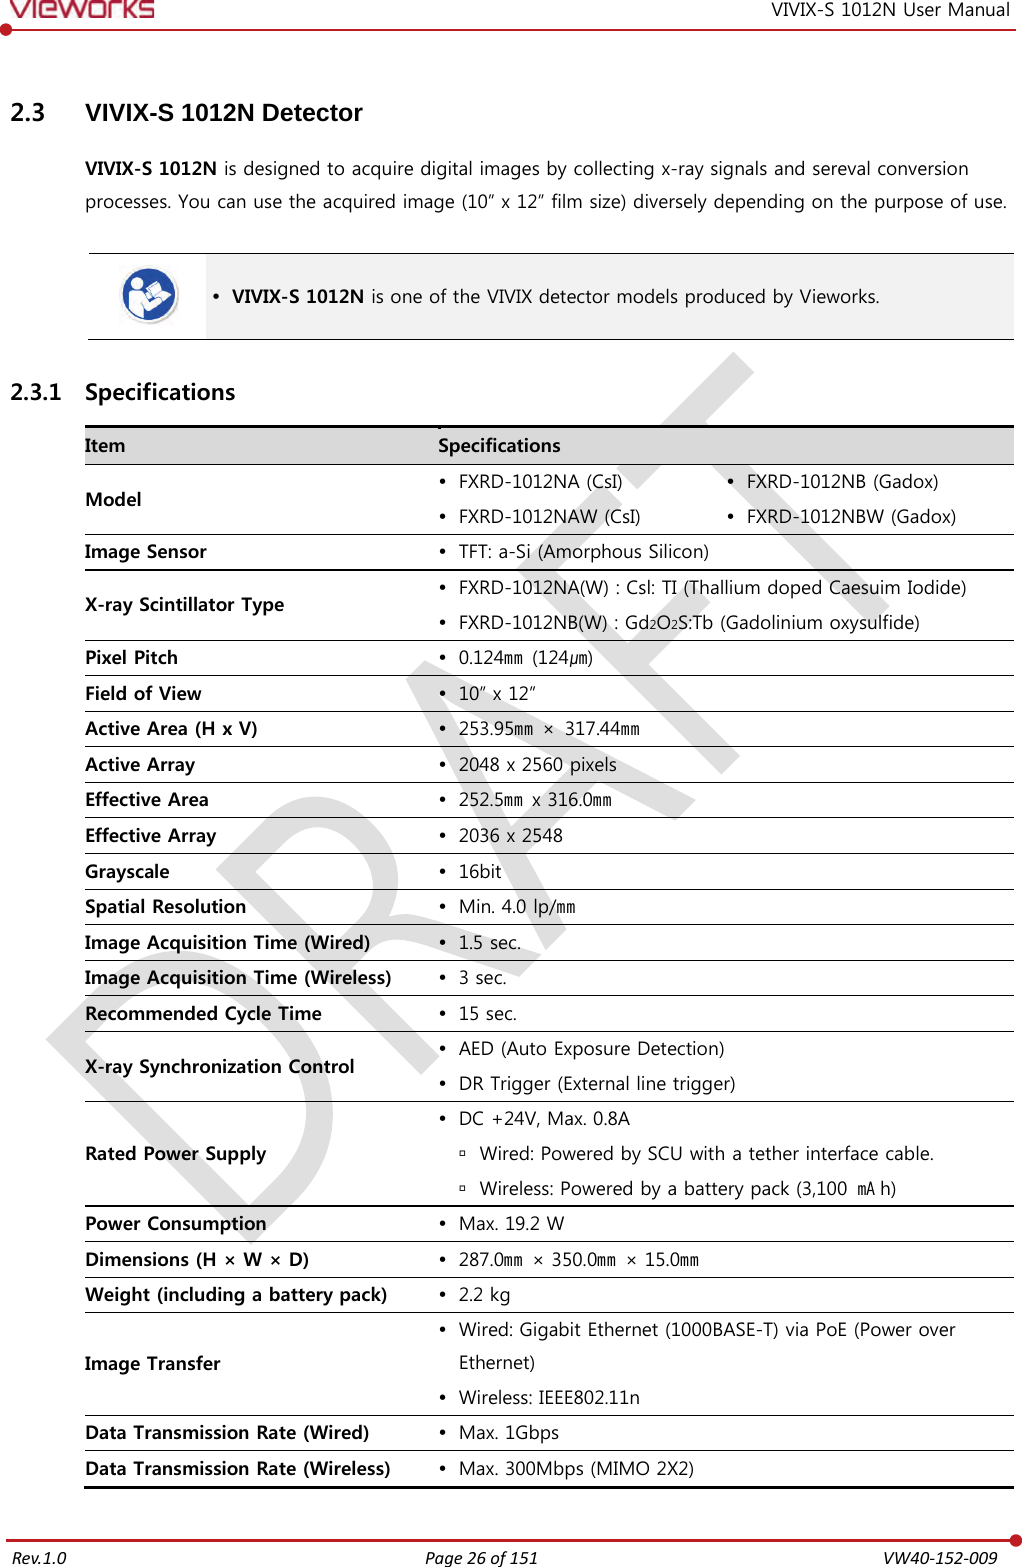   Rev.1.0 Page 26 of 151  VW40-152-009 VIVIX-S 1012N User Manual 2.3 VIVIX-S 1012N Detector VIVIX-S 1012N is designed to acquire digital images by collecting x-ray signals and sereval conversion processes. You can use the acquired image (10” x 12” film size) diversely depending on the purpose of use.    VIVIX-S 1012N is one of the VIVIX detector models produced by Vieworks. 2.3.1 Specifications Item Specifications Model  FXRD-1012NA (CsI)  FXRD-1012NAW (CsI)  FXRD-1012NB (Gadox)  FXRD-1012NBW (Gadox) Image Sensor  TFT: a-Si (Amorphous Silicon) X-ray Scintillator Type  FXRD-1012NA(W) : Csl: TI (Thallium doped Caesuim Iodide)  FXRD-1012NB(W) : Gd2O2S:Tb (Gadolinium oxysulfide) Pixel Pitch  0.124㎜  (124㎛) Field of View  10” x 12” Active Area (H x V)  253.95㎜  ×  317.44㎜ Active Array  2048 x 2560 pixels Effective Area  252.5㎜ x 316.0㎜ Effective Array  2036 x 2548 Grayscale  16bit Spatial Resolution  Min. 4.0 lp/㎜ Image Acquisition Time (Wired)  1.5 sec. Image Acquisition Time (Wireless)  3 sec. Recommended Cycle Time  15 sec. X-ray Synchronization Control  AED (Auto Exposure Detection)  DR Trigger (External line trigger) Rated Power Supply  DC +24V, Max. 0.8A  Wired: Powered by SCU with a tether interface cable.  Wireless: Powered by a battery pack (3,100  ㎃h) Power Consumption  Max. 19.2 W Dimensions (H × W × D)  287.0㎜ × 350.0㎜ × 15.0㎜ Weight (including a battery pack)  2.2 kg Image Transfer  Wired: Gigabit Ethernet (1000BASE-T) via PoE (Power over Ethernet)  Wireless: IEEE802.11n Data Transmission Rate (Wired)  Max. 1Gbps Data Transmission Rate (Wireless)  Max. 300Mbps (MIMO 2X2) 